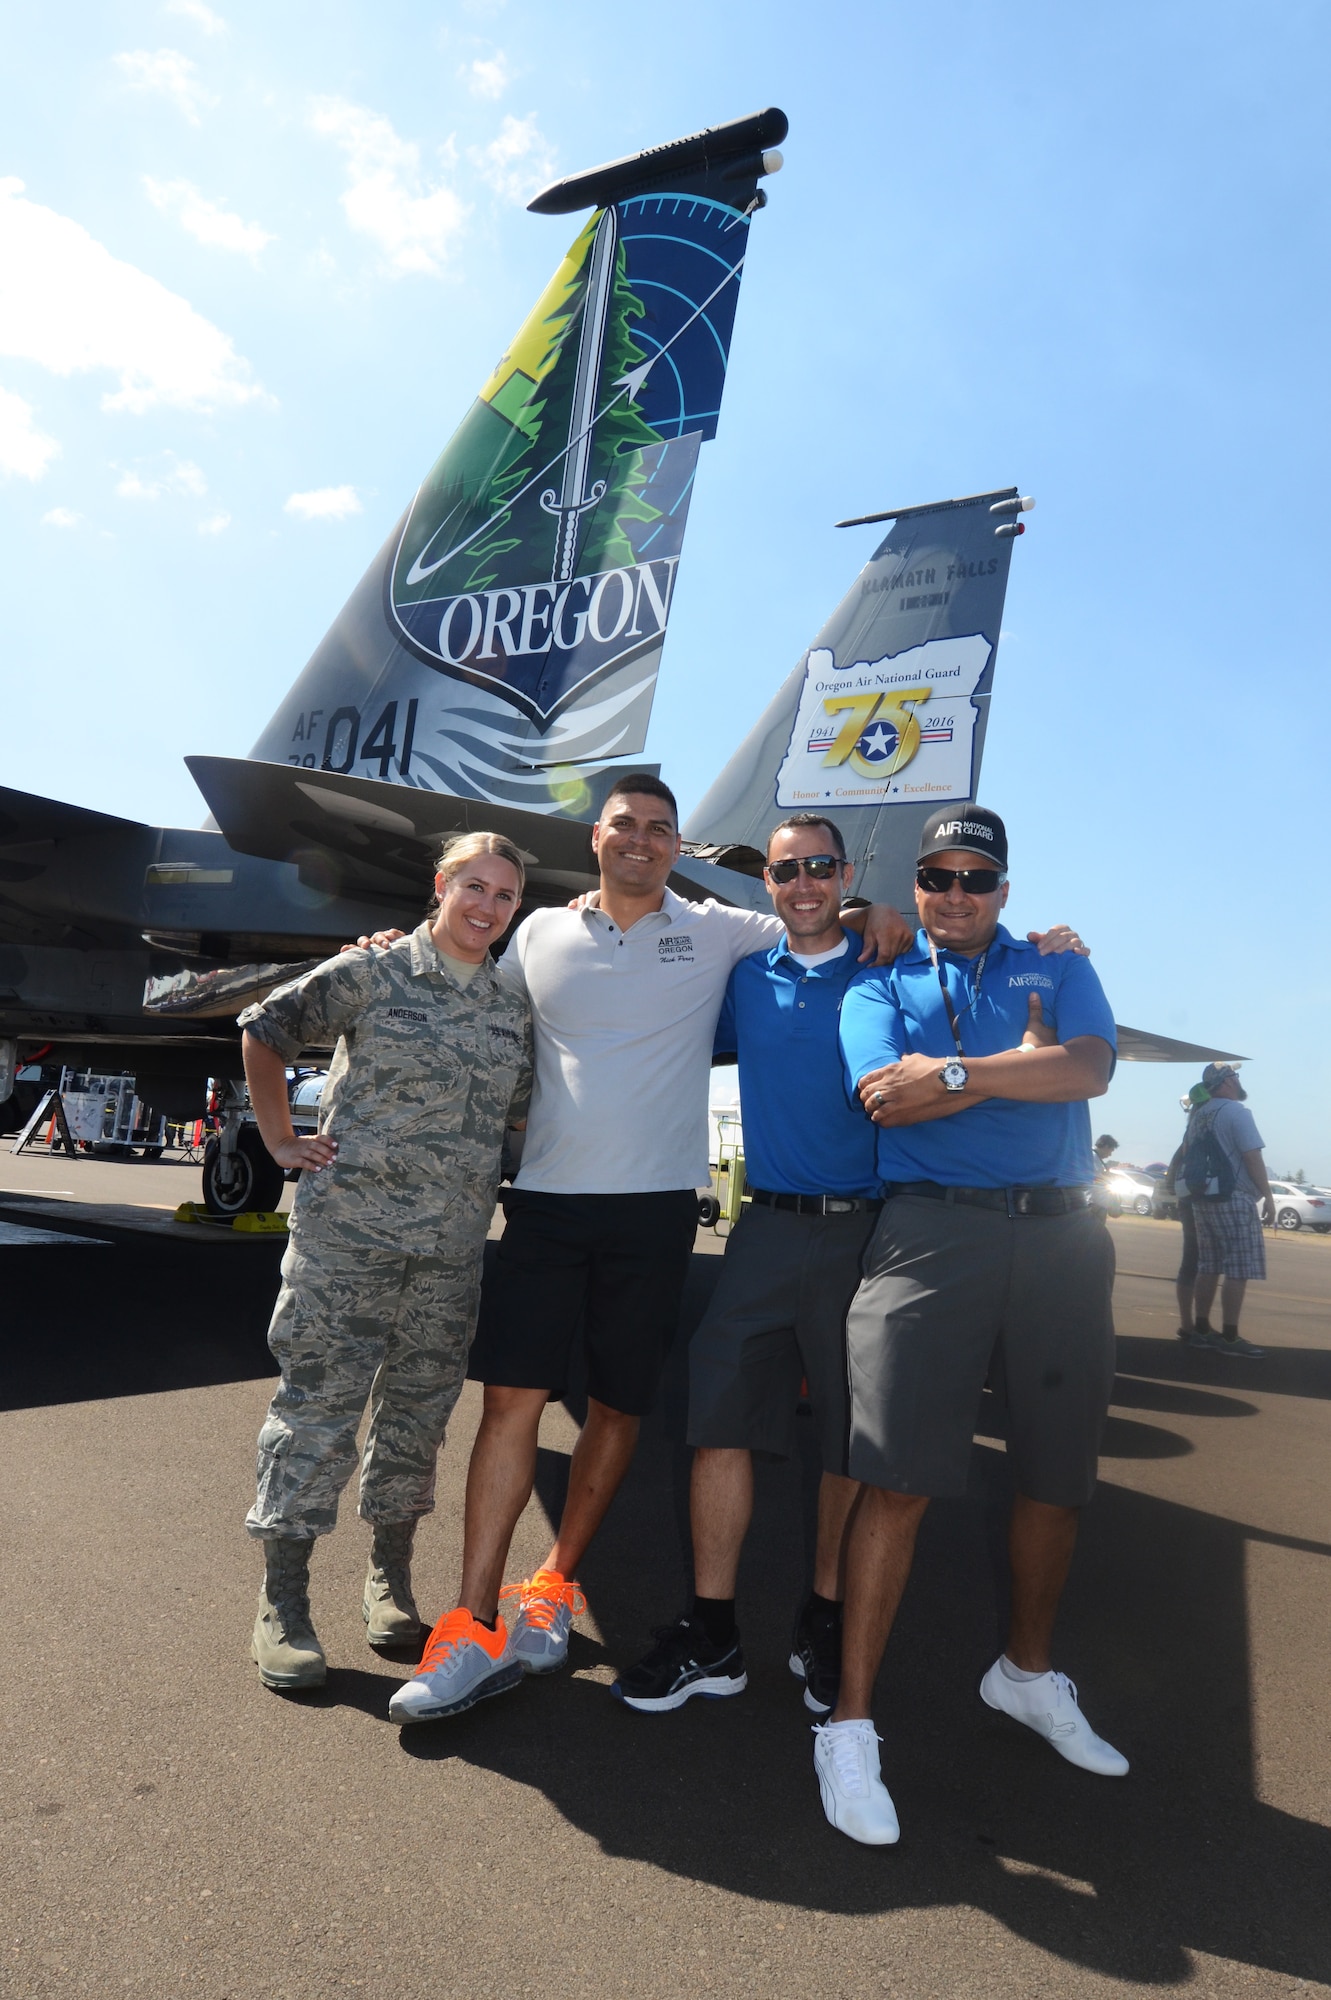 Oregon Air National Guard Recruiters pause for a photo with an F-15 Eagle during the Oregon International Air Show, Hillsboro International Airport, Aug. 6, 2016. (U.S. Air National Guard photo by Tech. Sgt. John Hughel, 142nd Fighter Wing Public Affairs/Released).